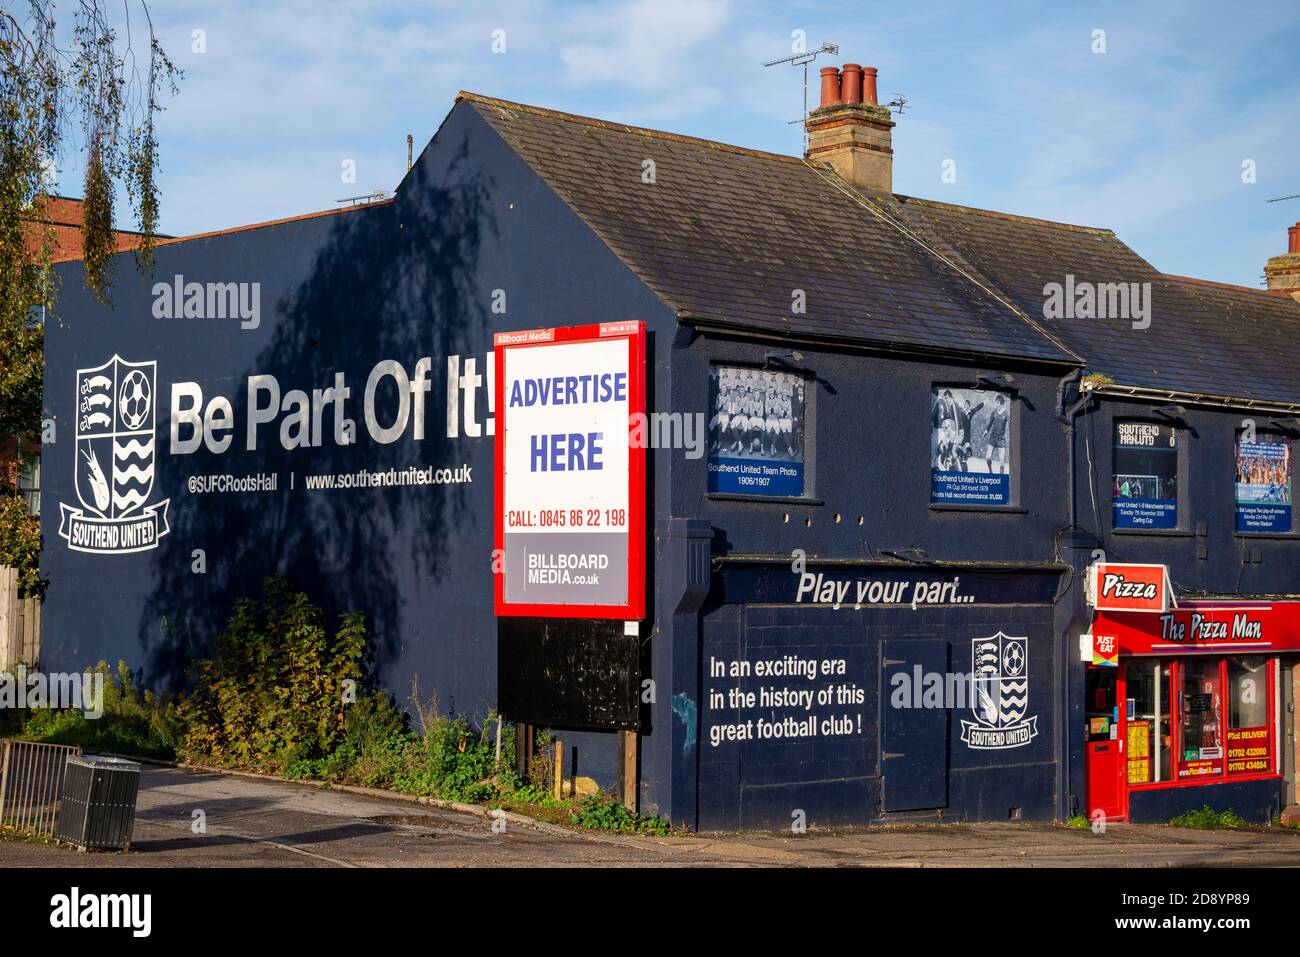 Row of properties in Victoria Avenue, Southend, Essex, purchased by Southend Utd FC owner to be redeveloped with plans for new stadium. Advertising Stock Photo